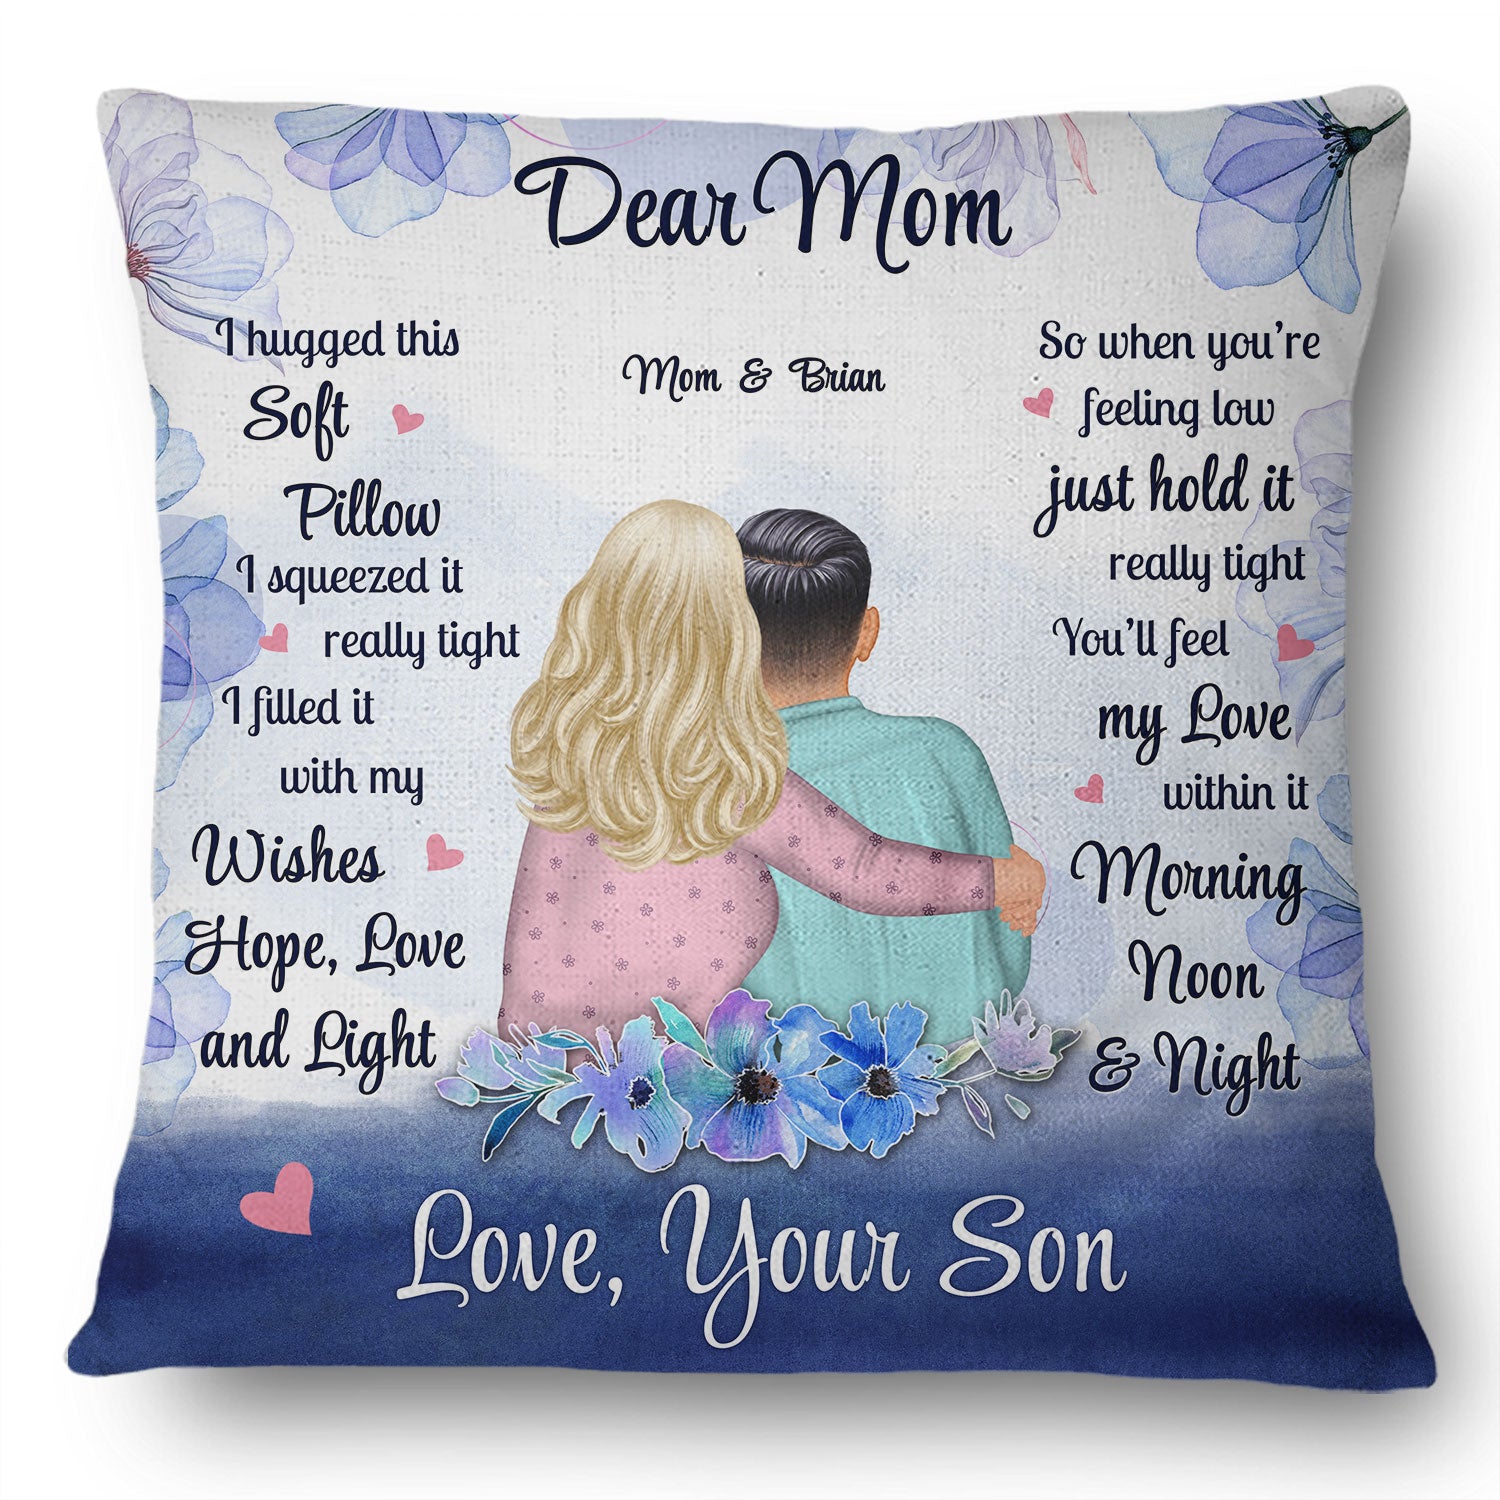 I Hugged This Soft Pillow Morning, Noon And Night Watercolor Style - Birthday, Loving Gift For Mom, Mother, Grandma, Grandmother, Son, Grandson - Personalized Custom Pillow